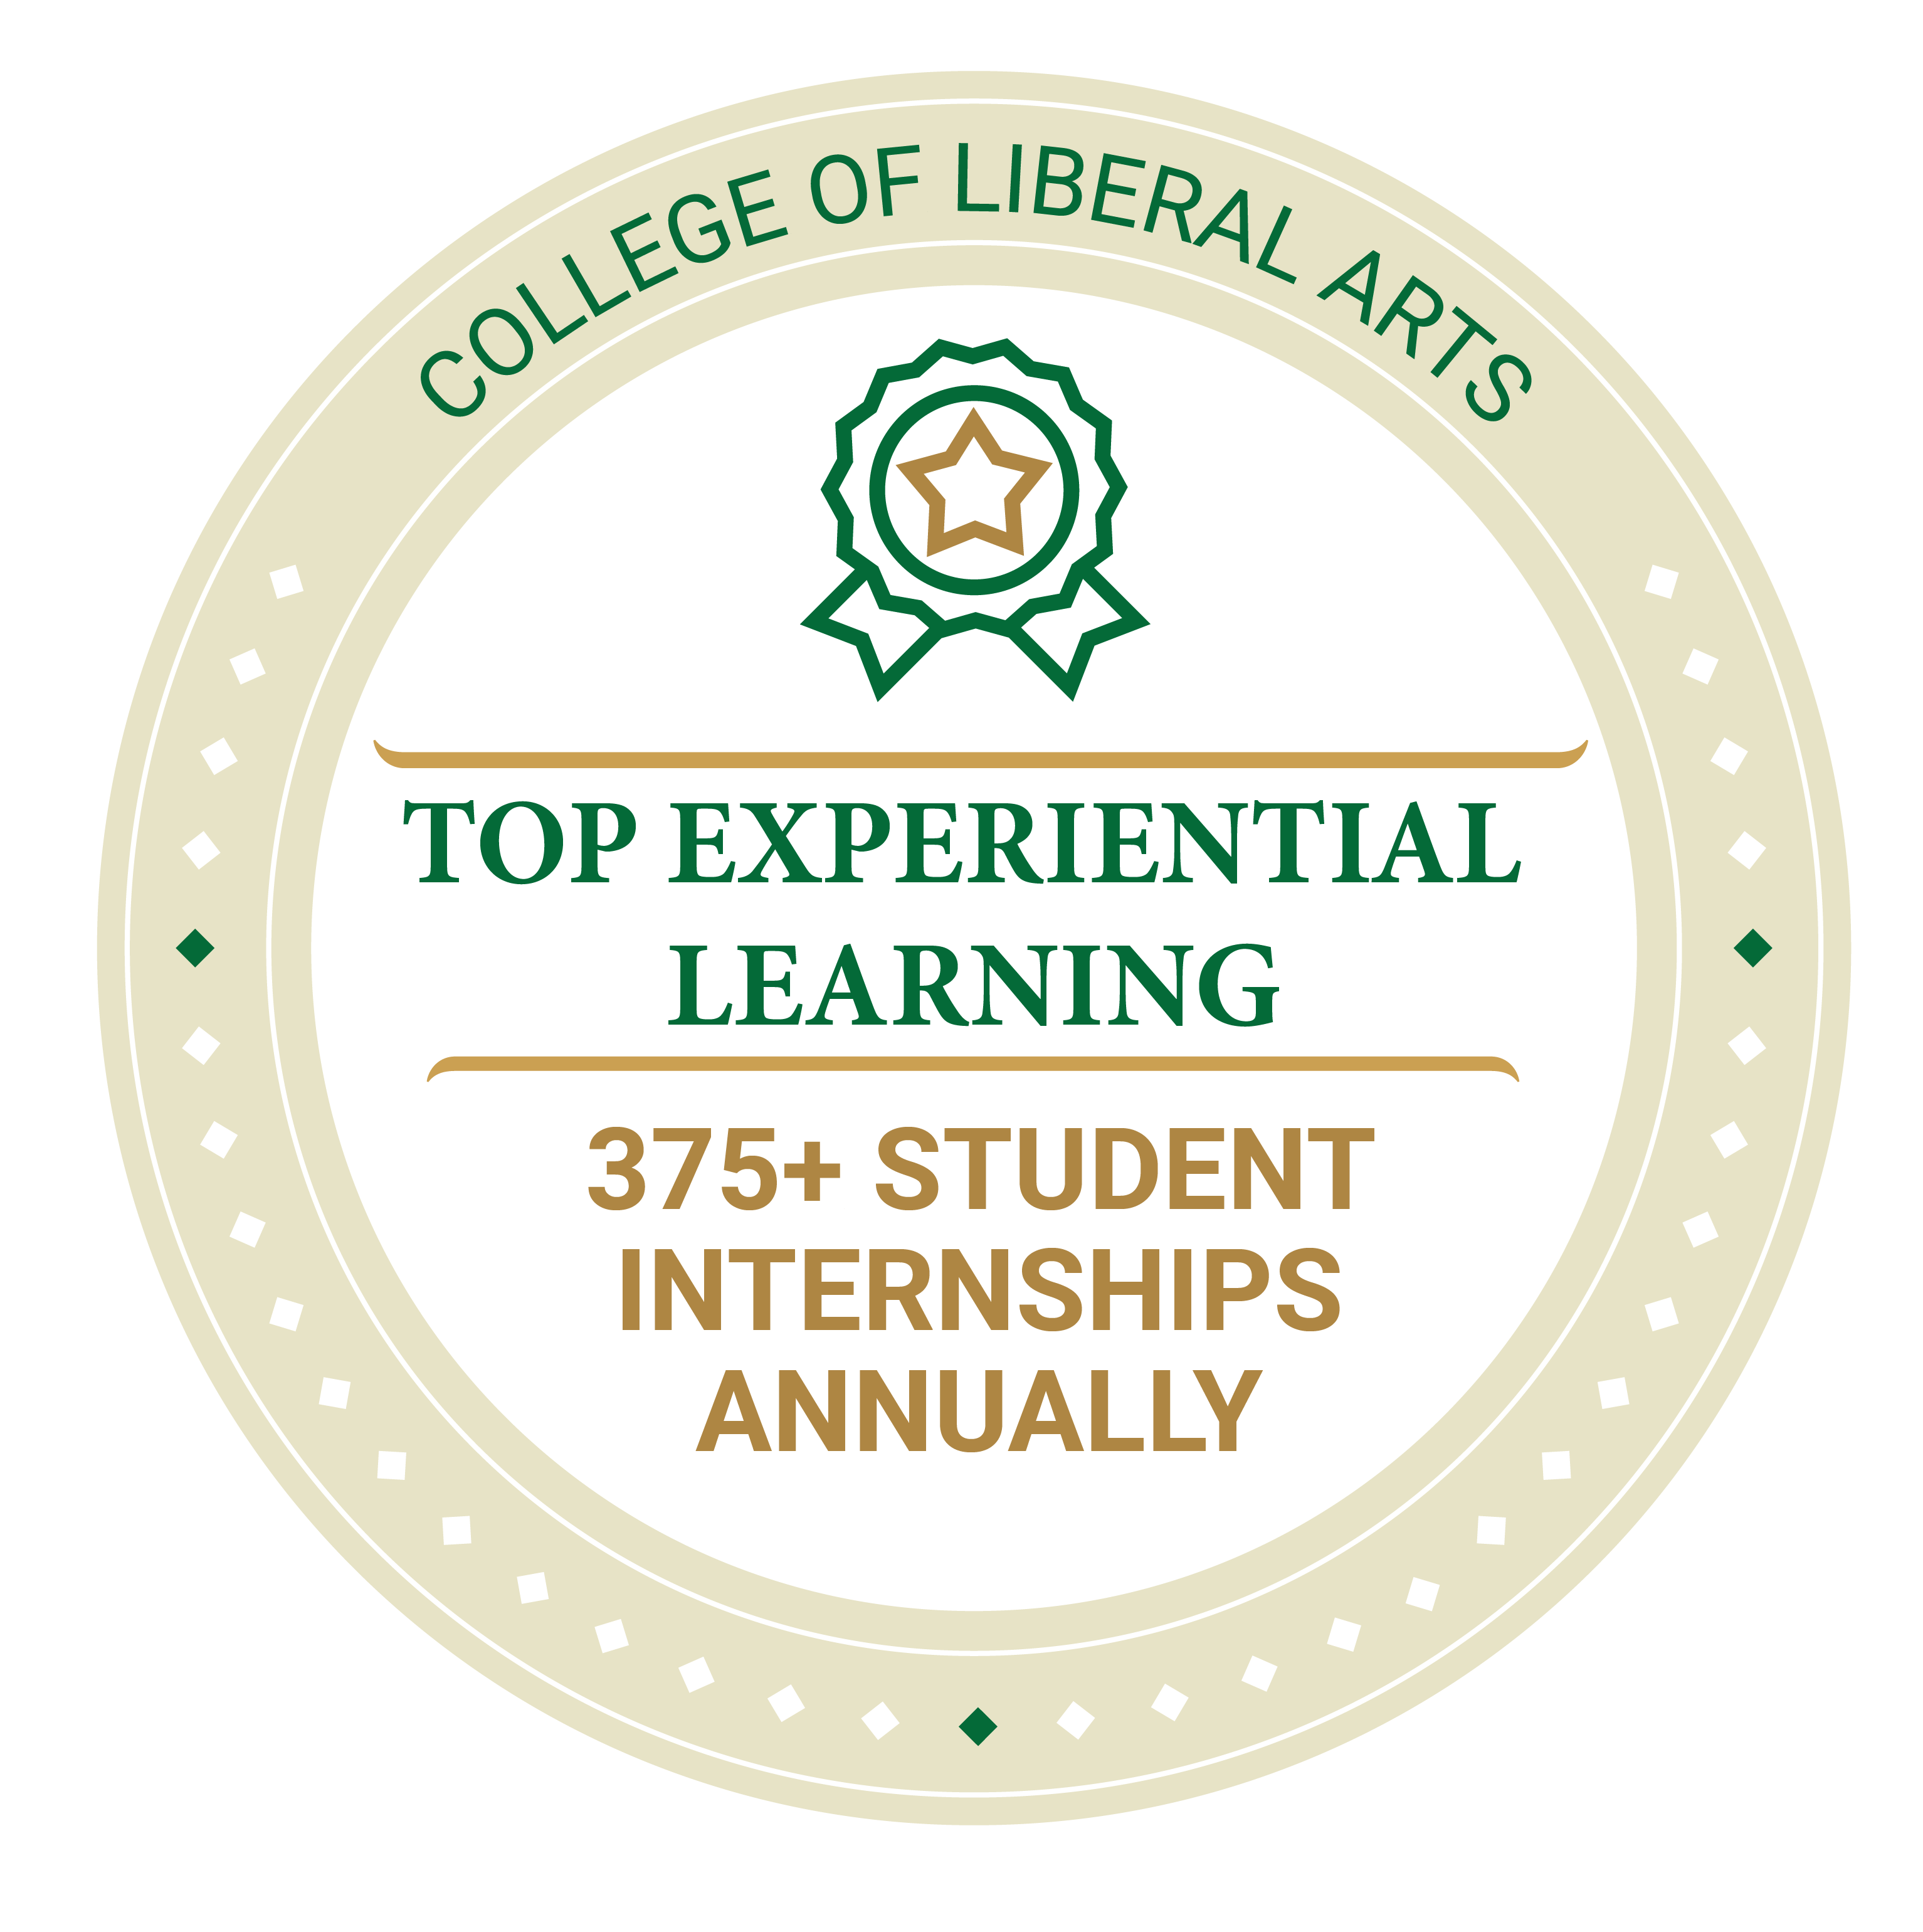 College of liberal arts top experiential learning 375 student internships annually